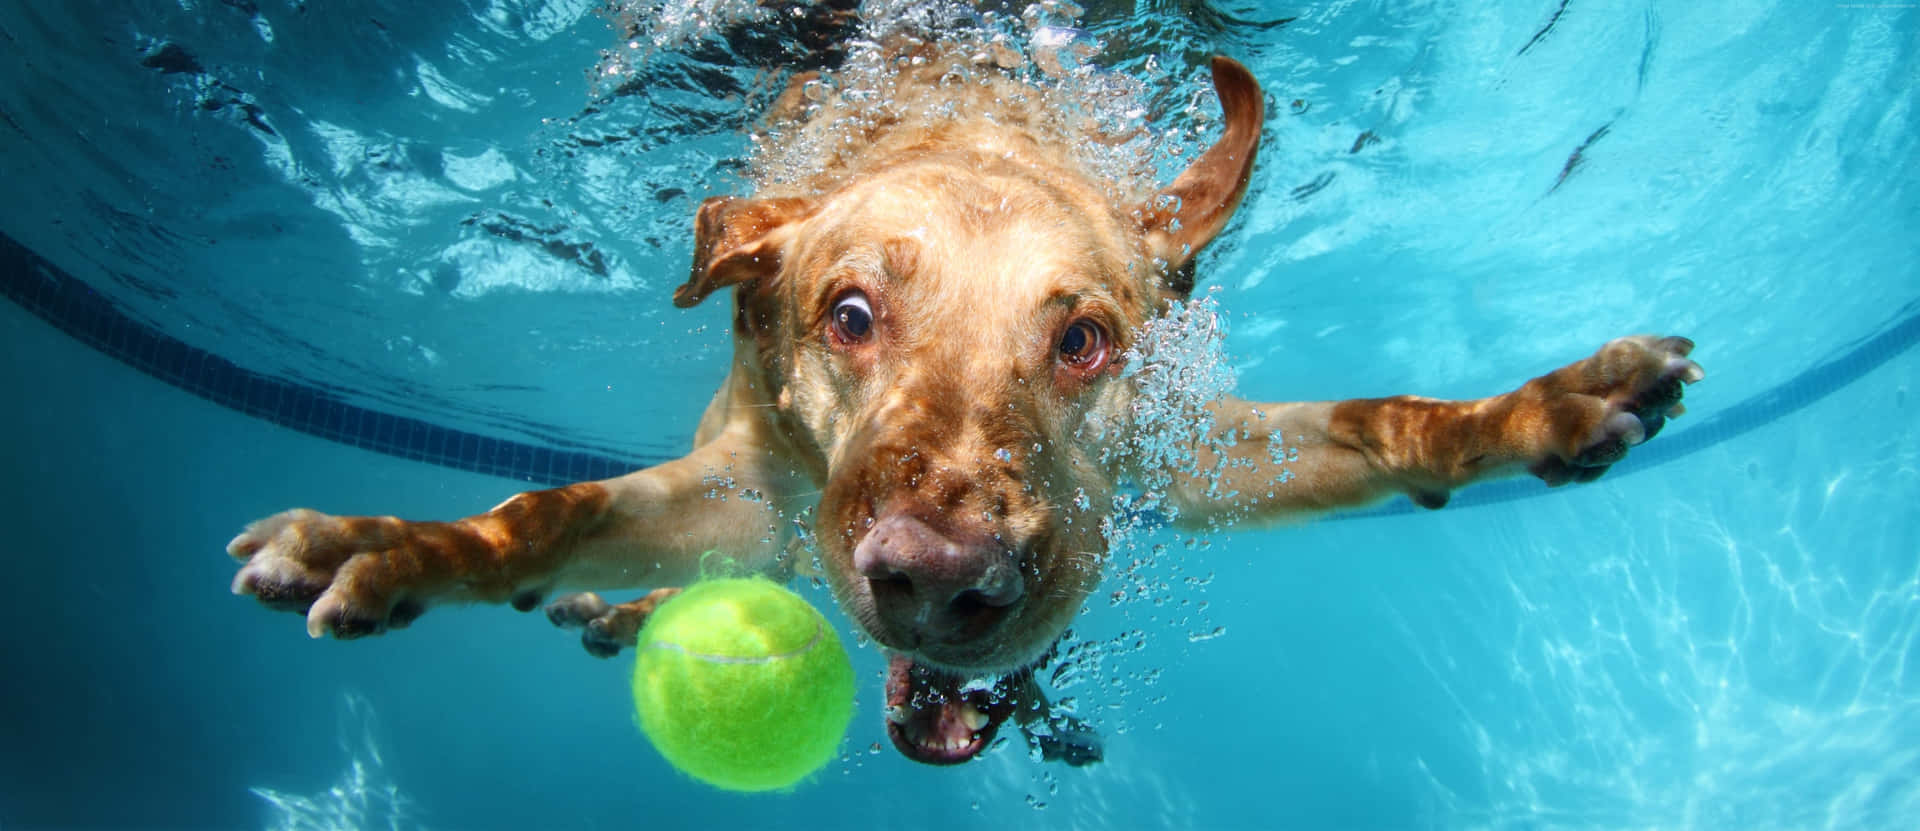 Funny Dog Underwater With Ball Wallpaper